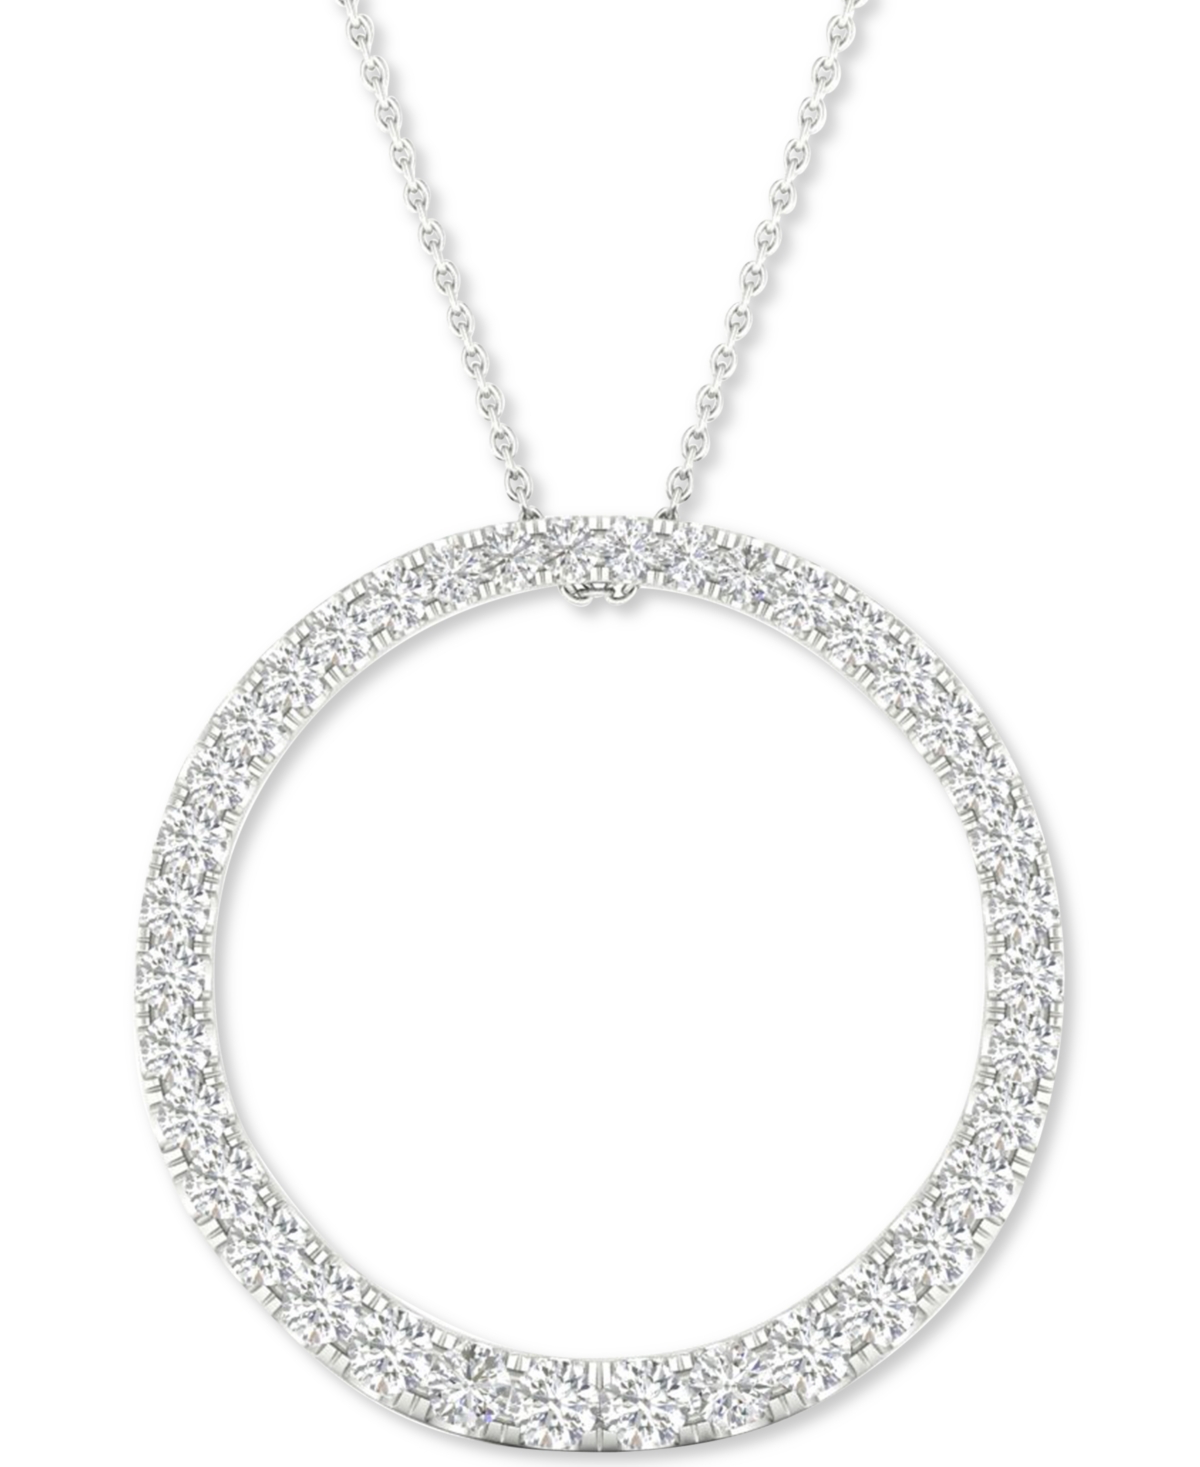 Lab-Created Diamond Circle Pendant Necklace (1/2 ct. t.w.) in Sterling Silver, 16" + 2" extender - White Gold